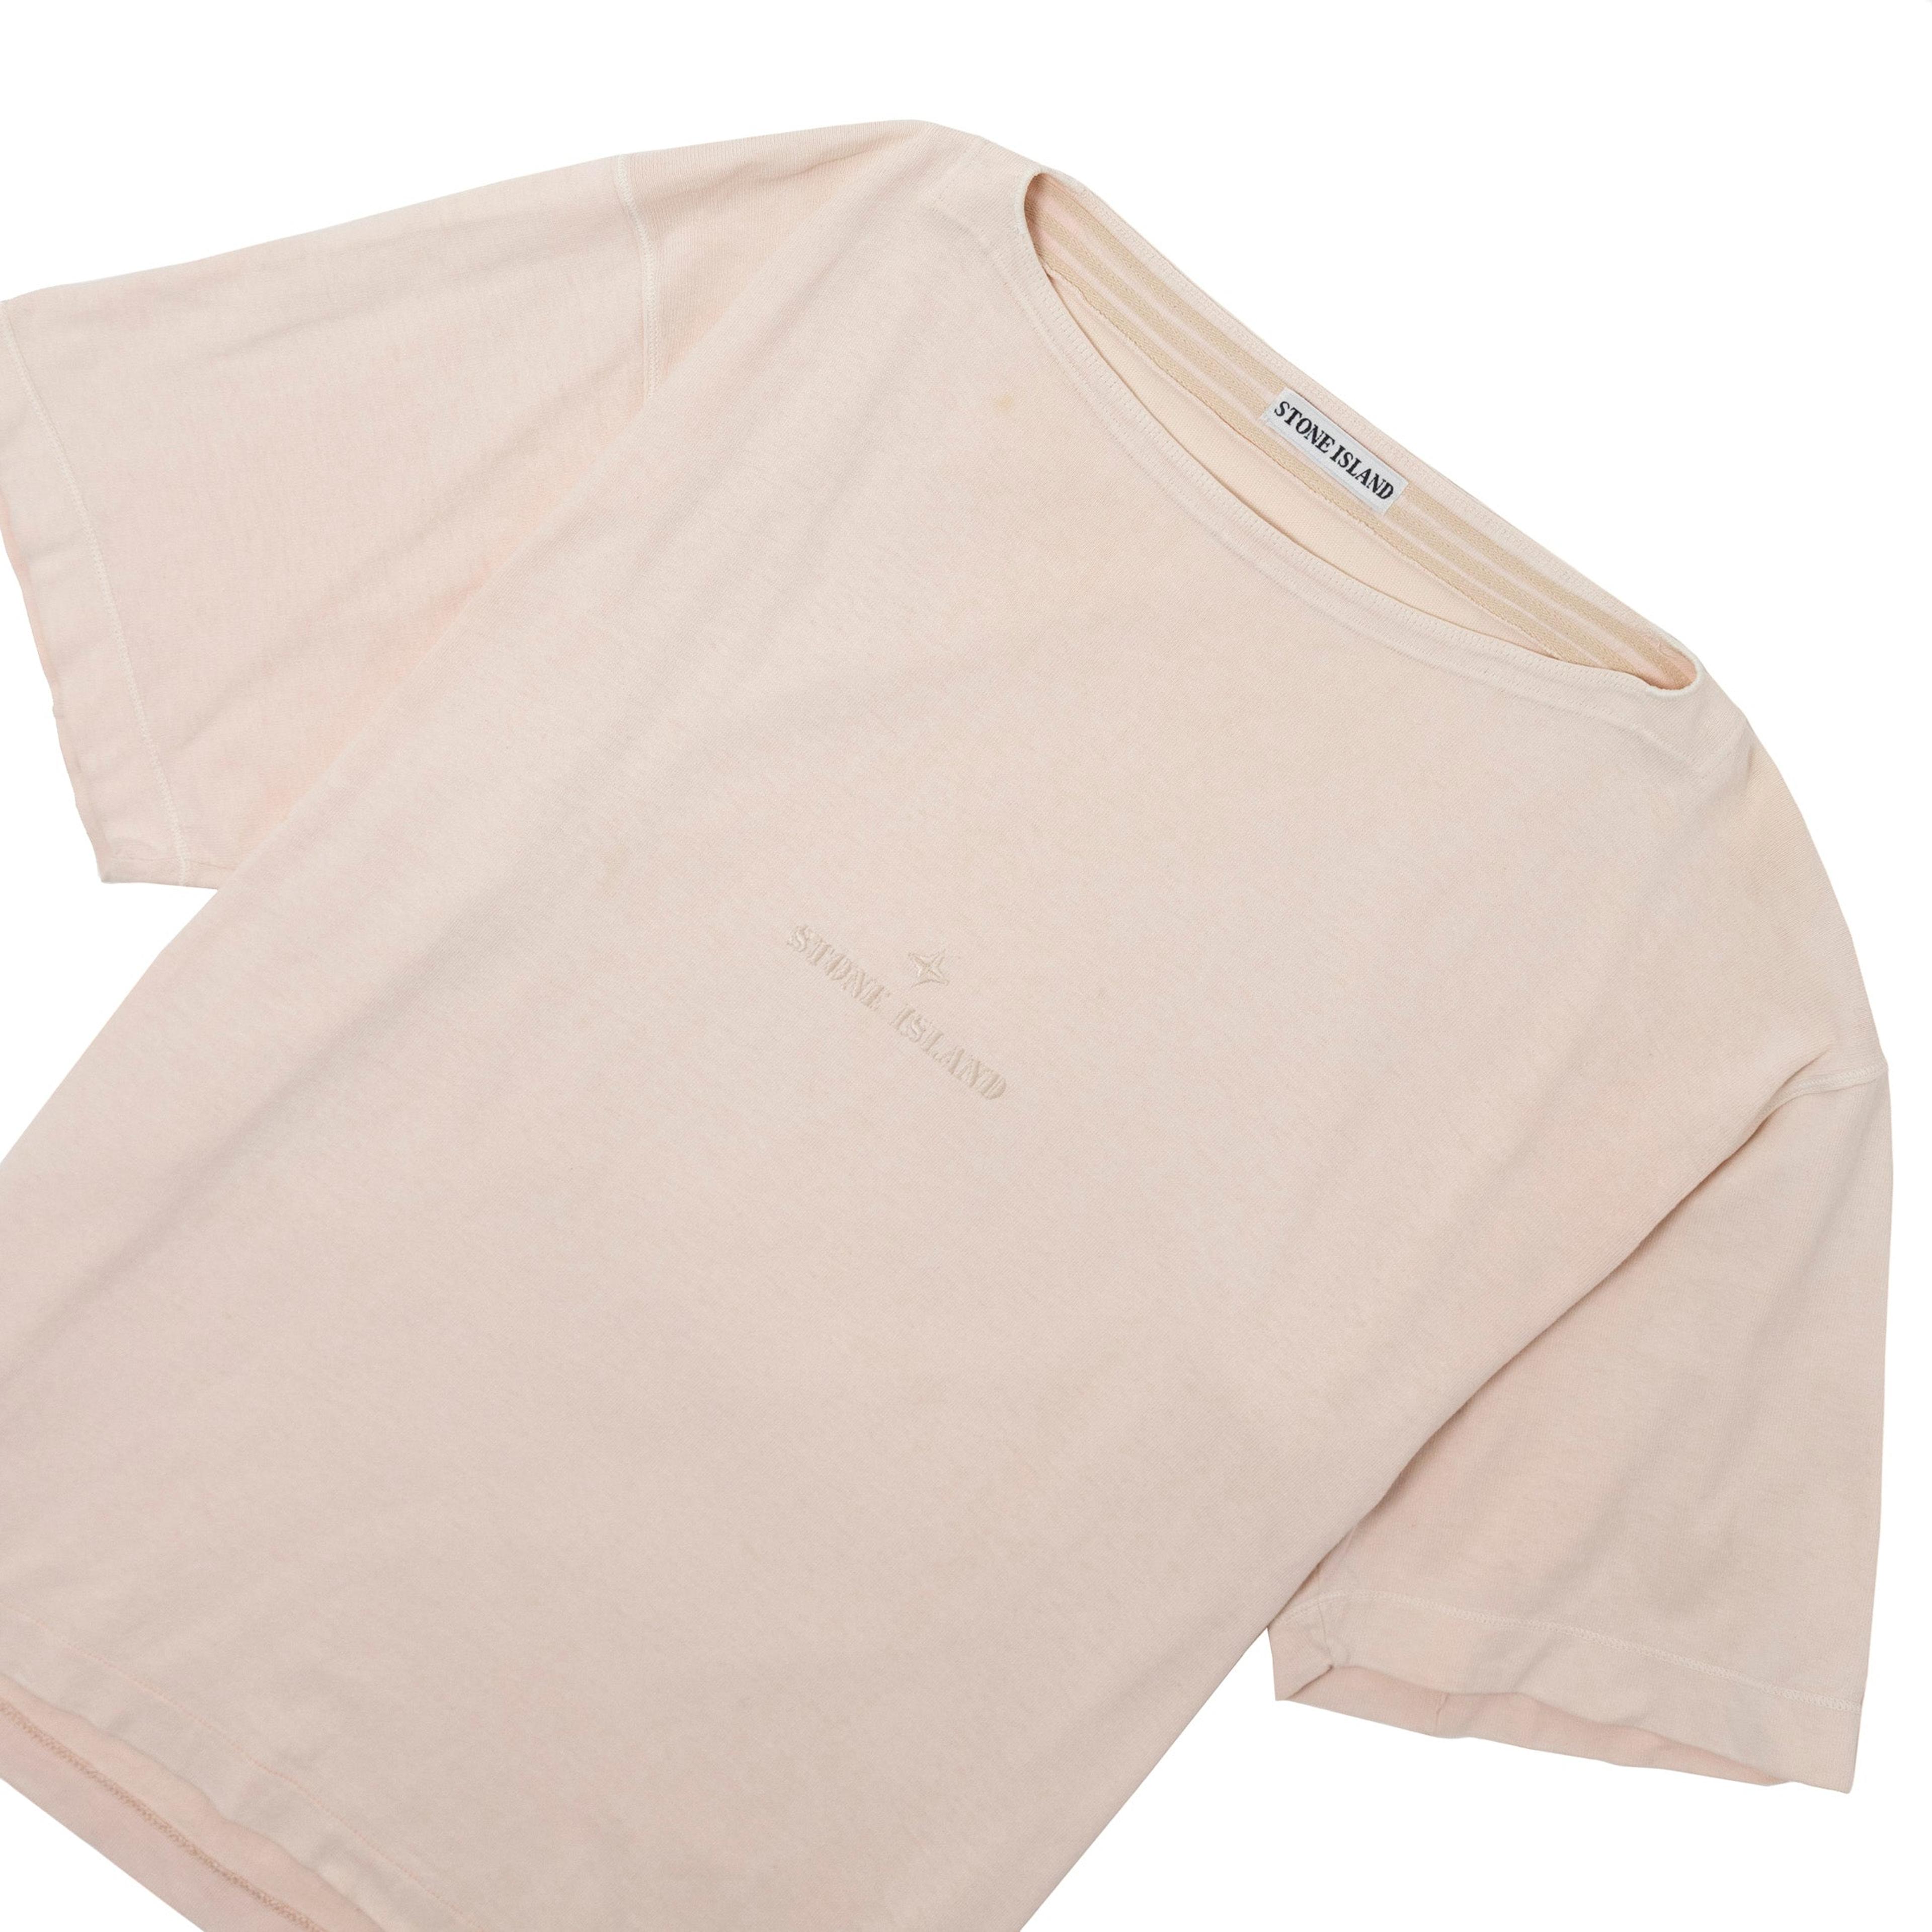 Alternate View 1 of Stone Island Pink Spellout Tee